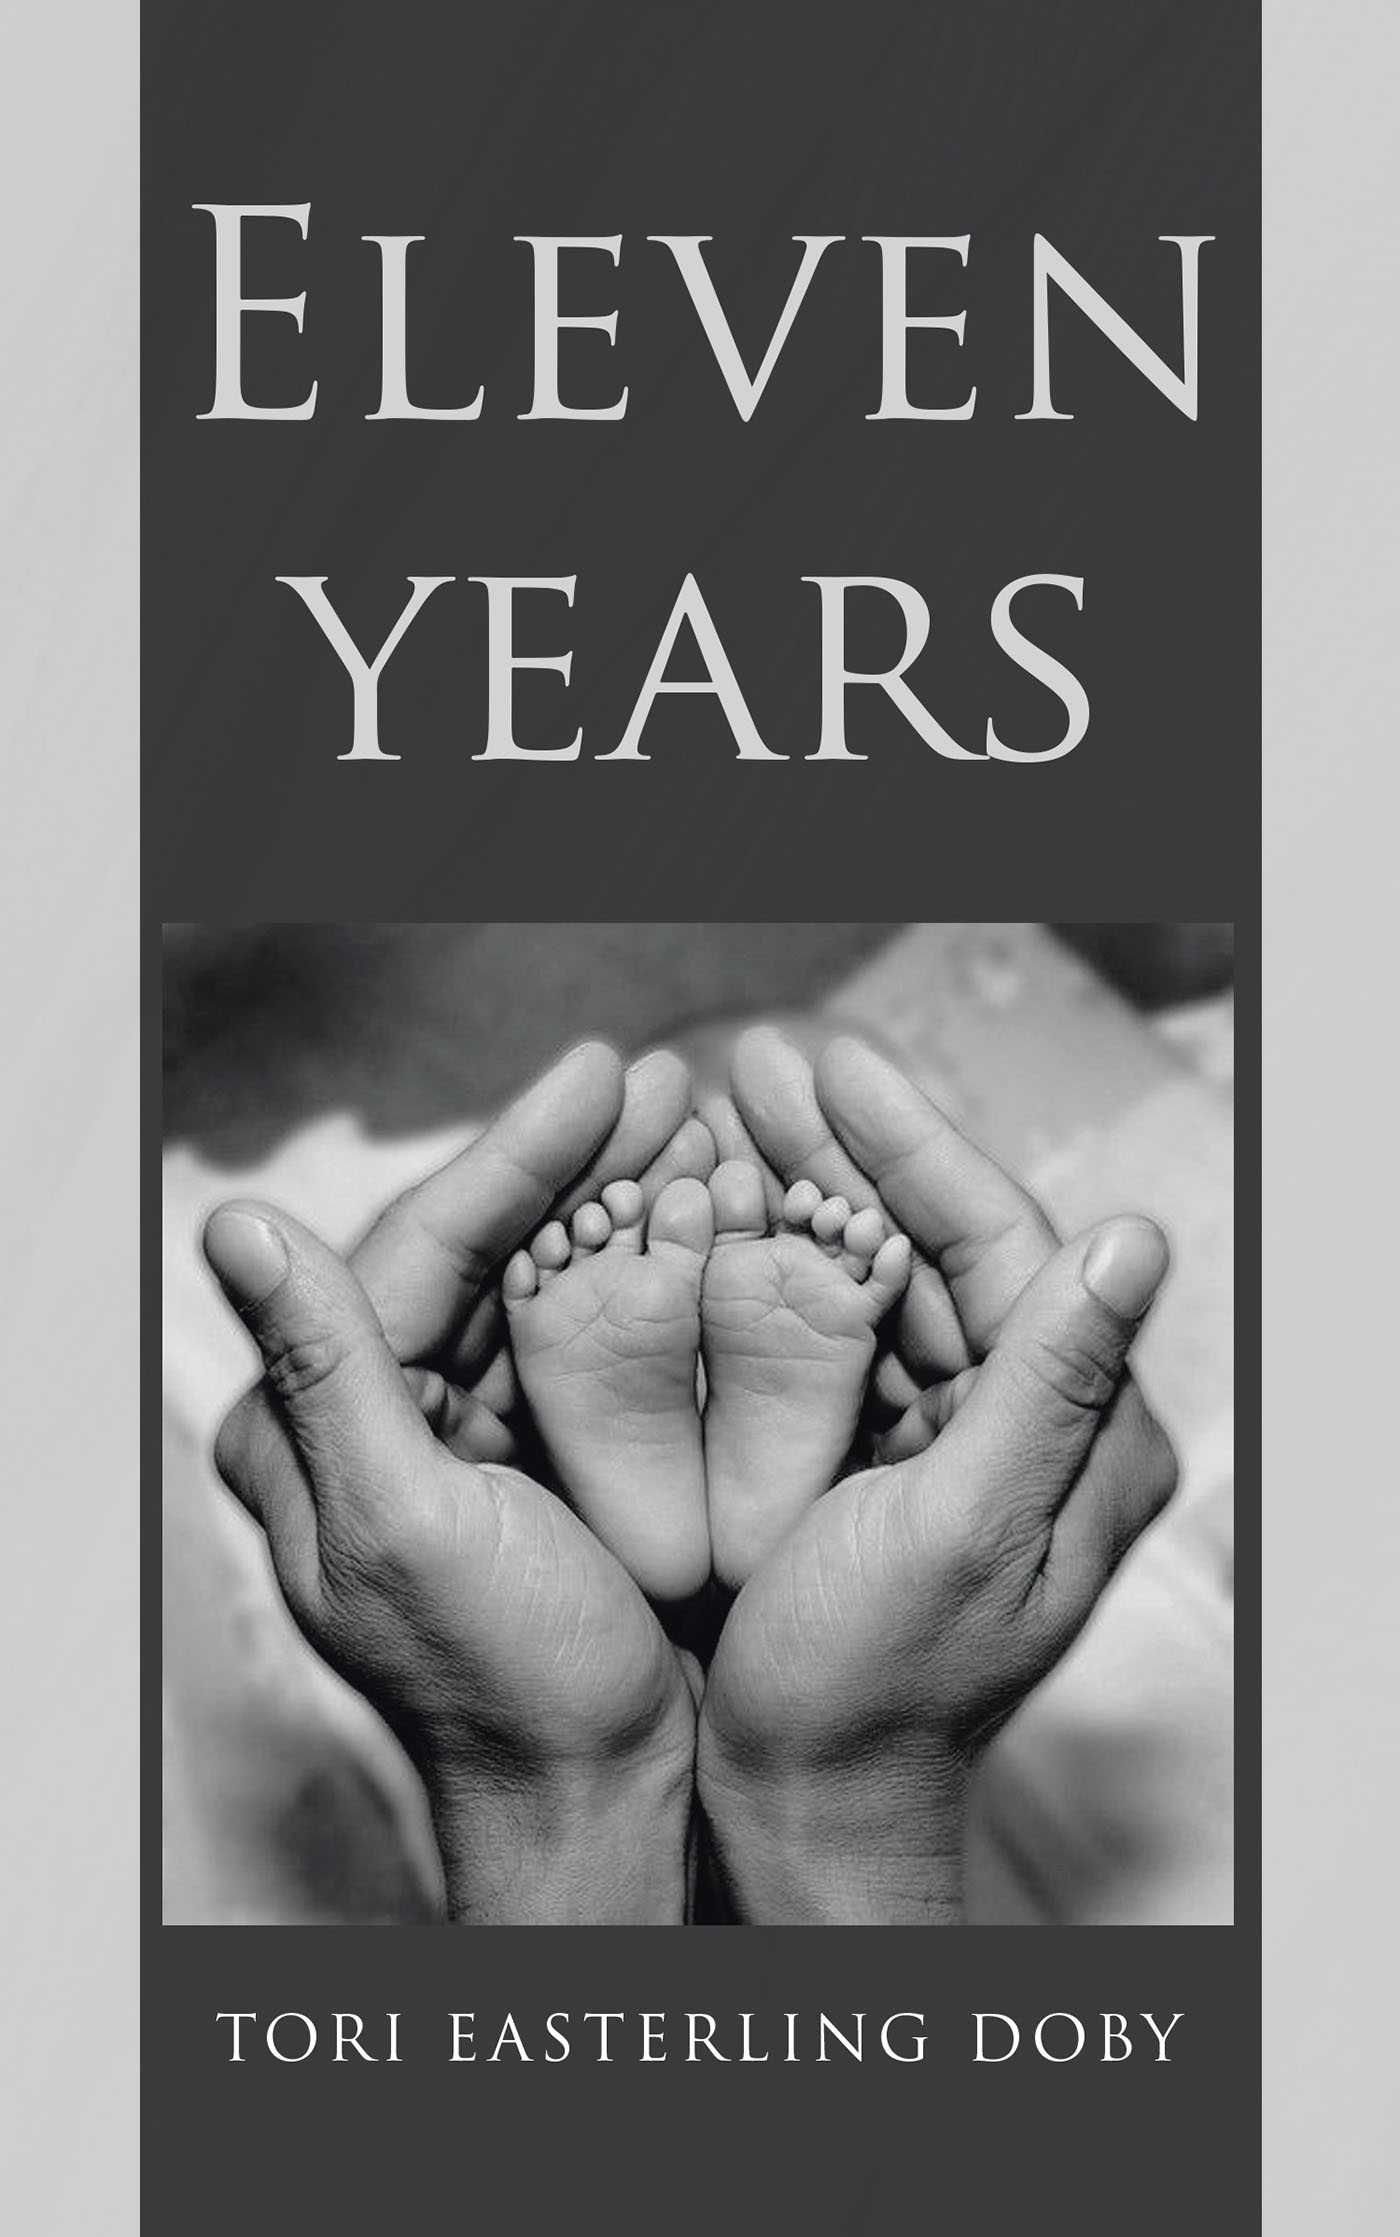 Author Tori Easterling Doby’s New Book, "Eleven Years," is a Heartfelt True Story Describing the Author's Journey with Infertility & Learning to Trust God’s Plan for Her